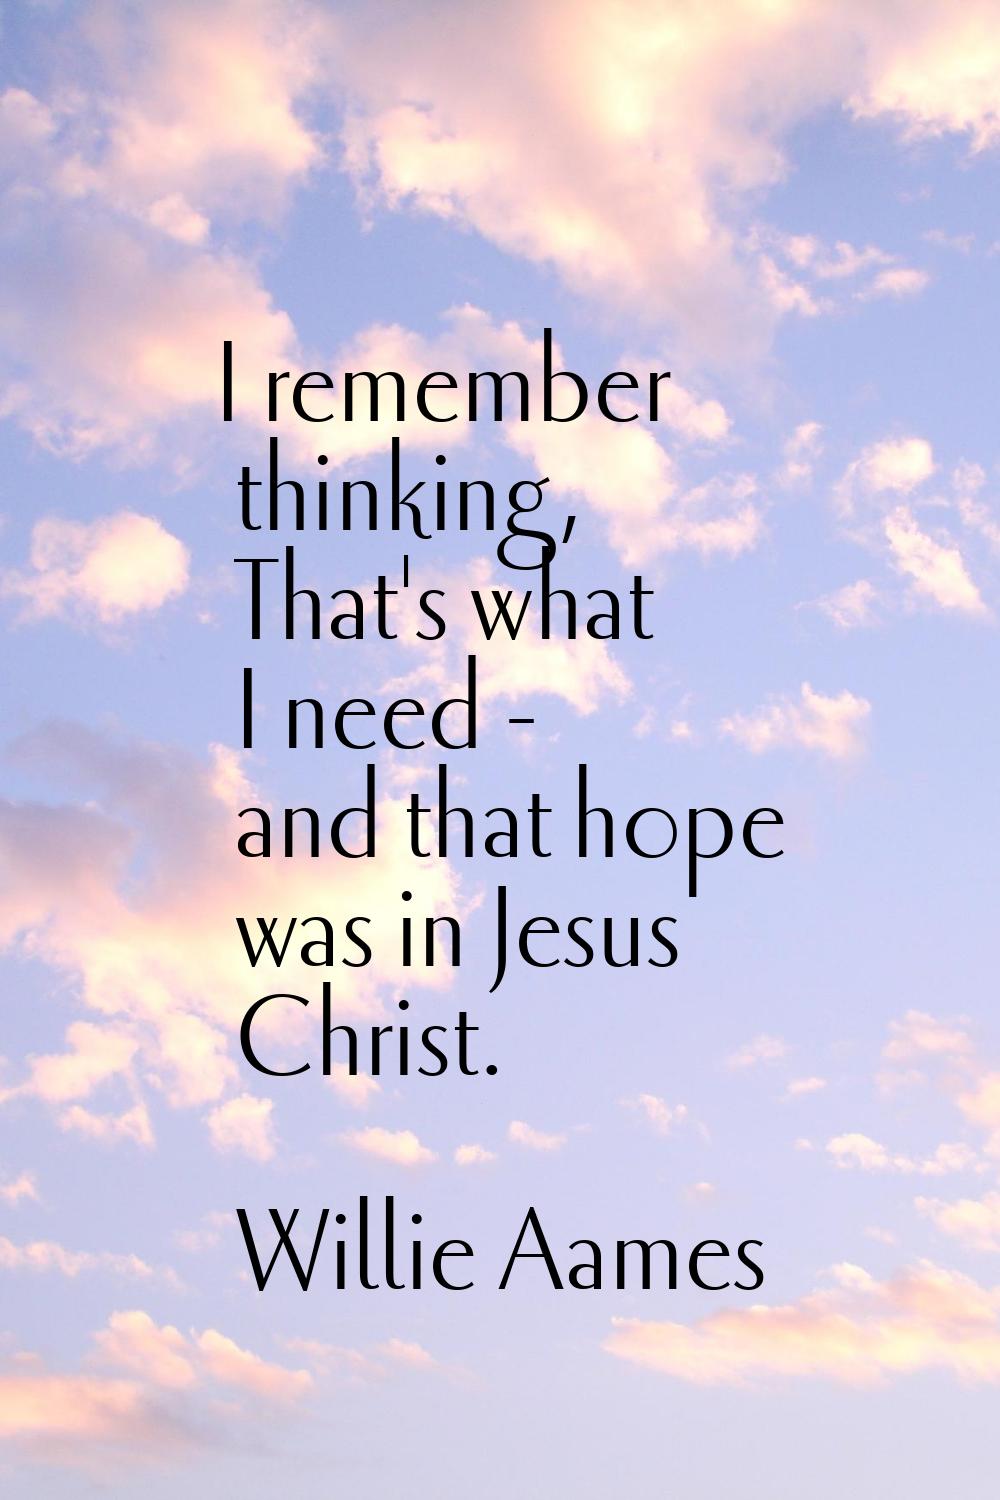 I remember thinking, That's what I need - and that hope was in Jesus Christ.